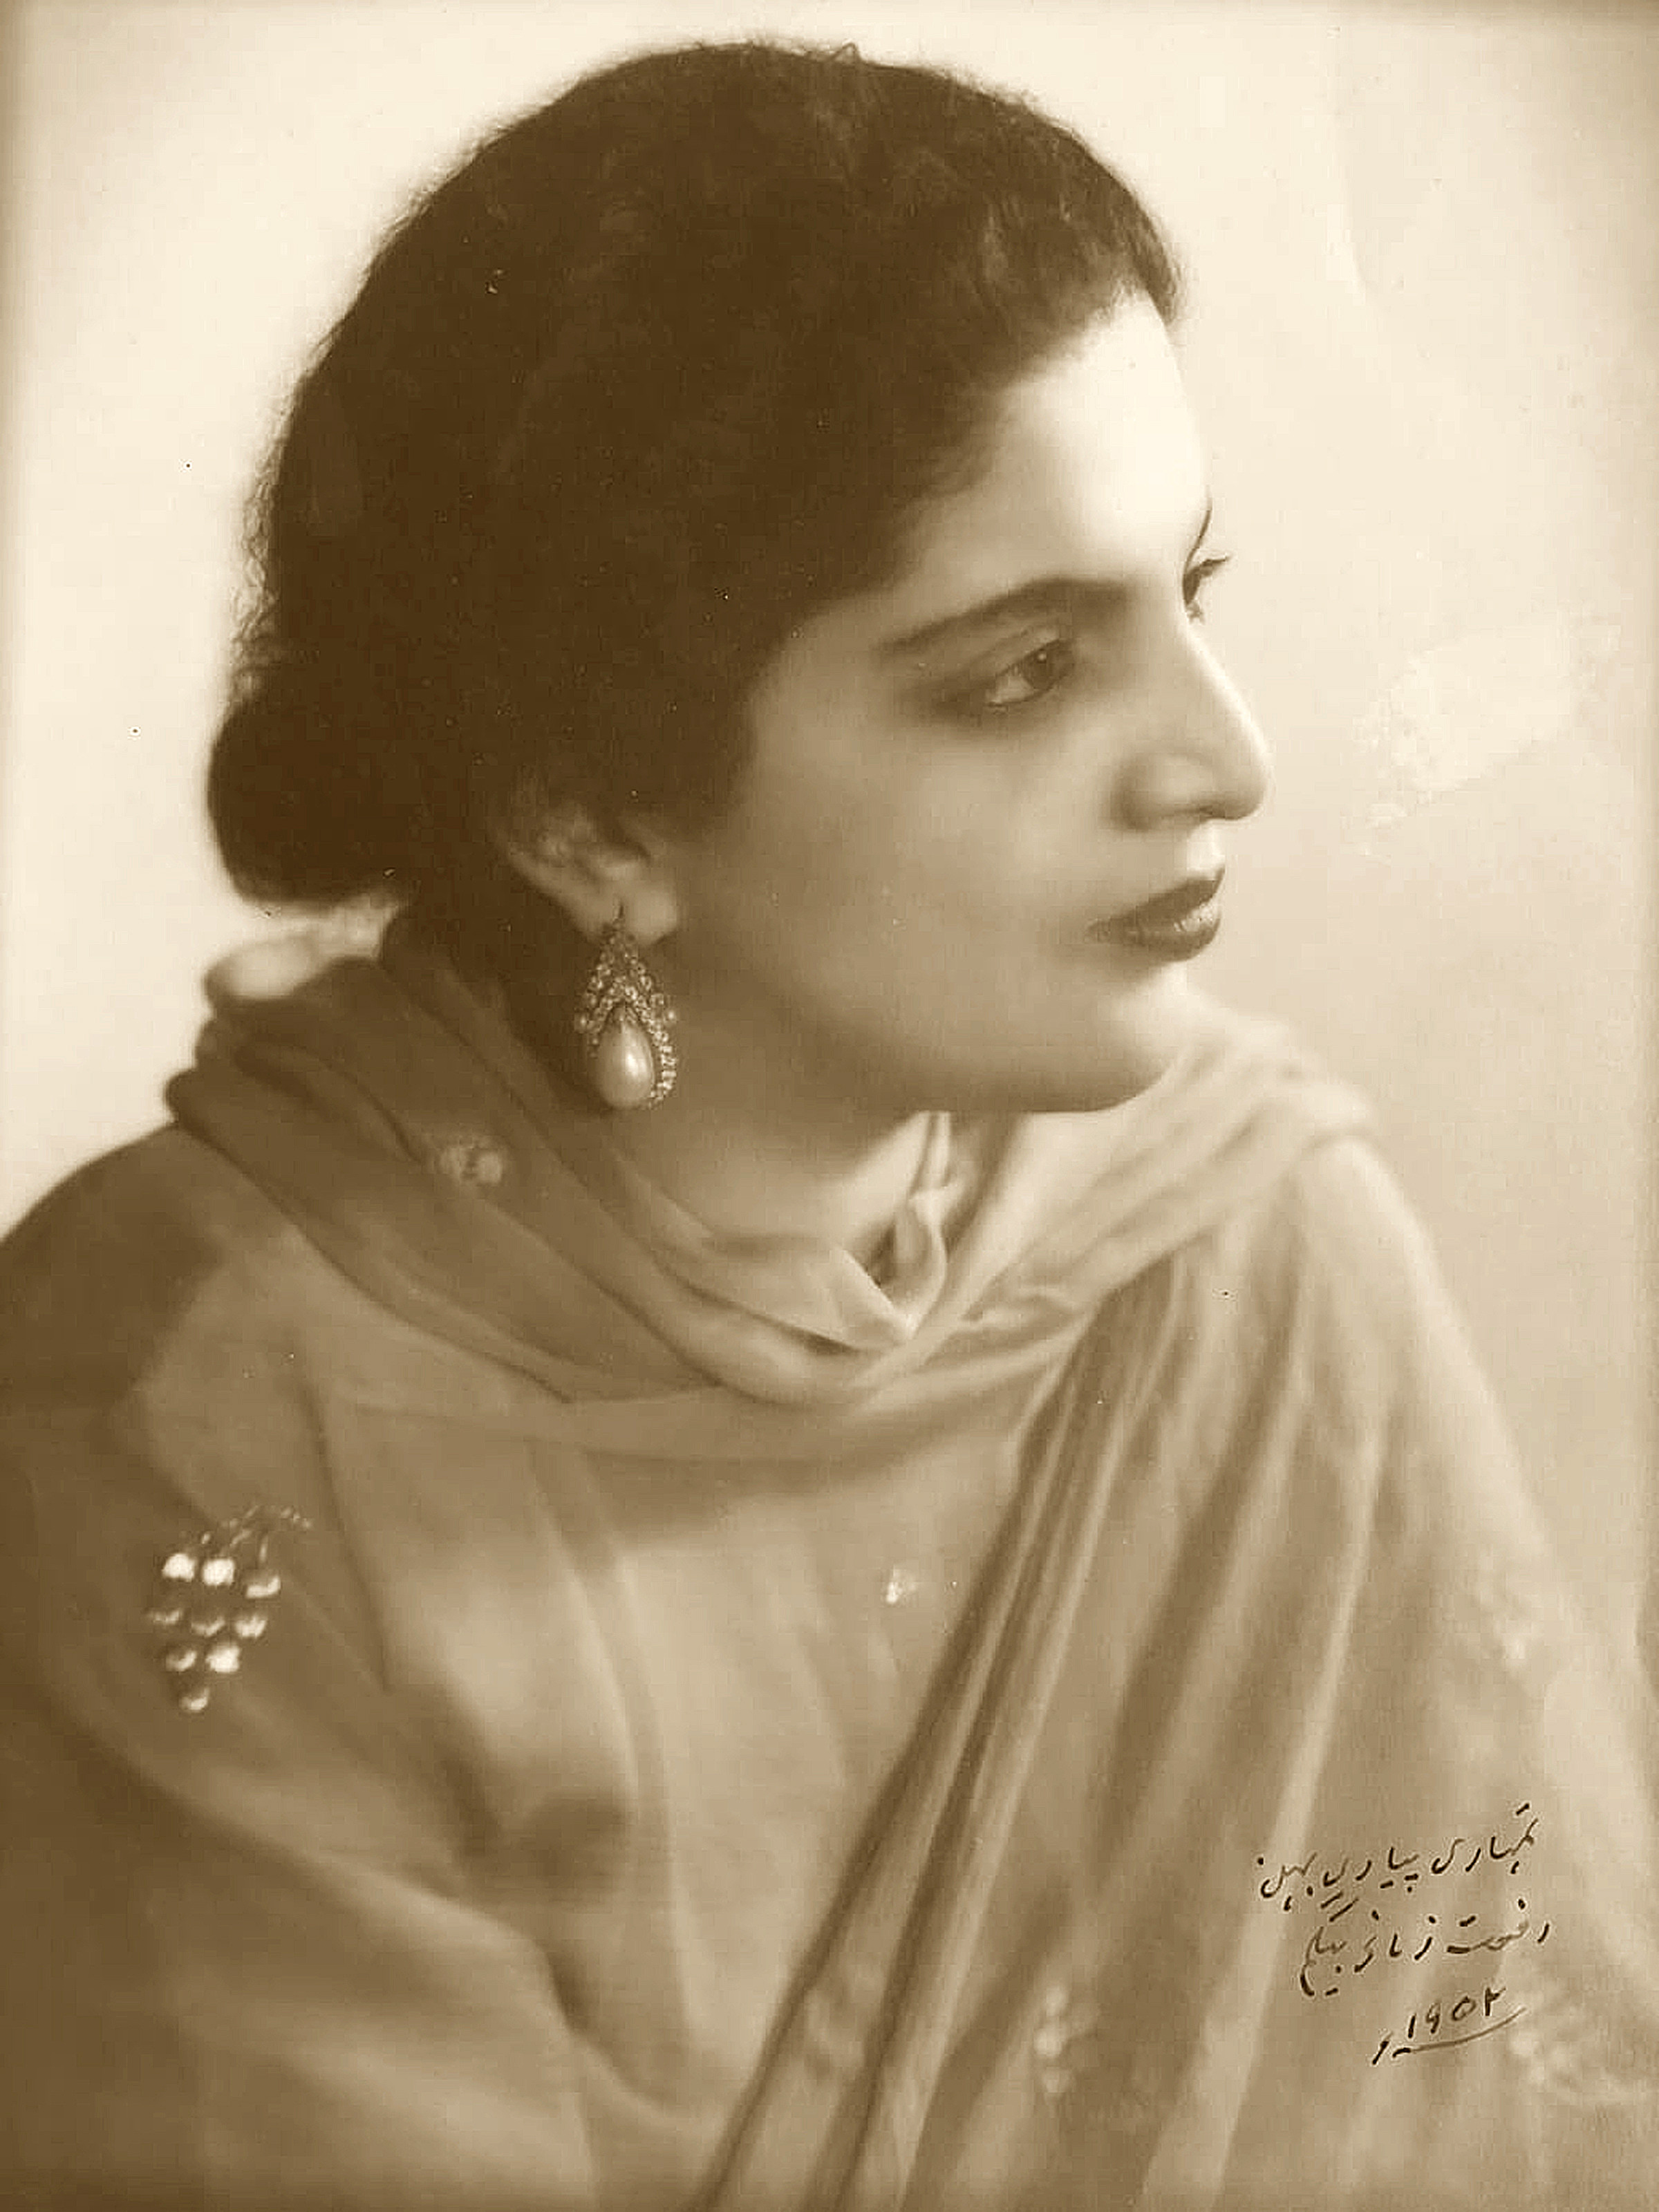 Sir Samad’s eldest daughter HH Rafat Zamani, Begum of Rampur State from 1930 to1949.